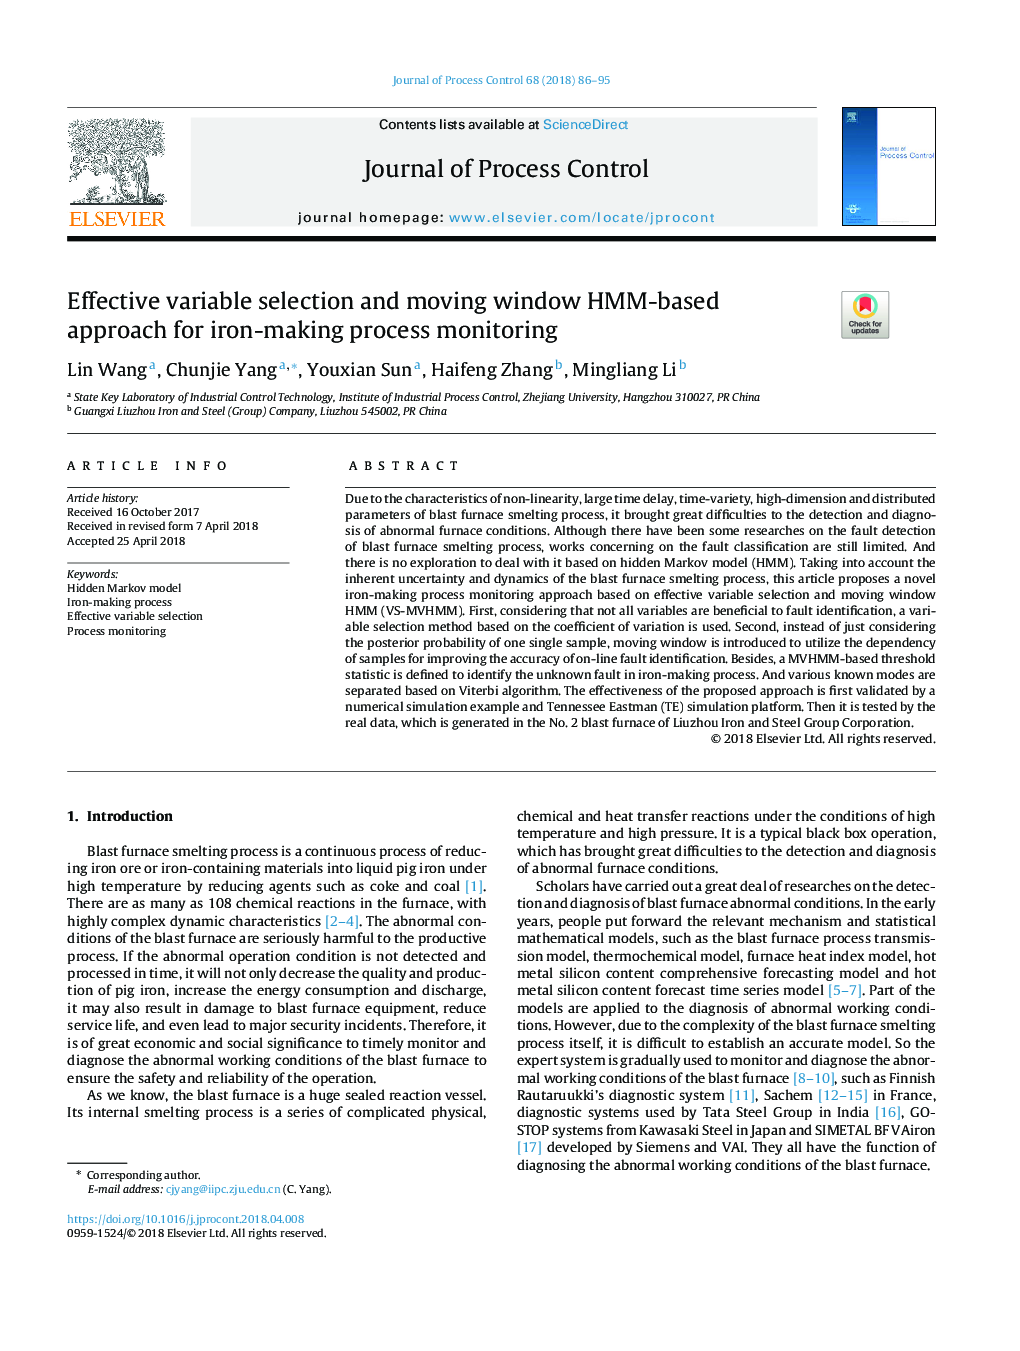 Effective variable selection and moving window HMM-based approach for iron-making process monitoring